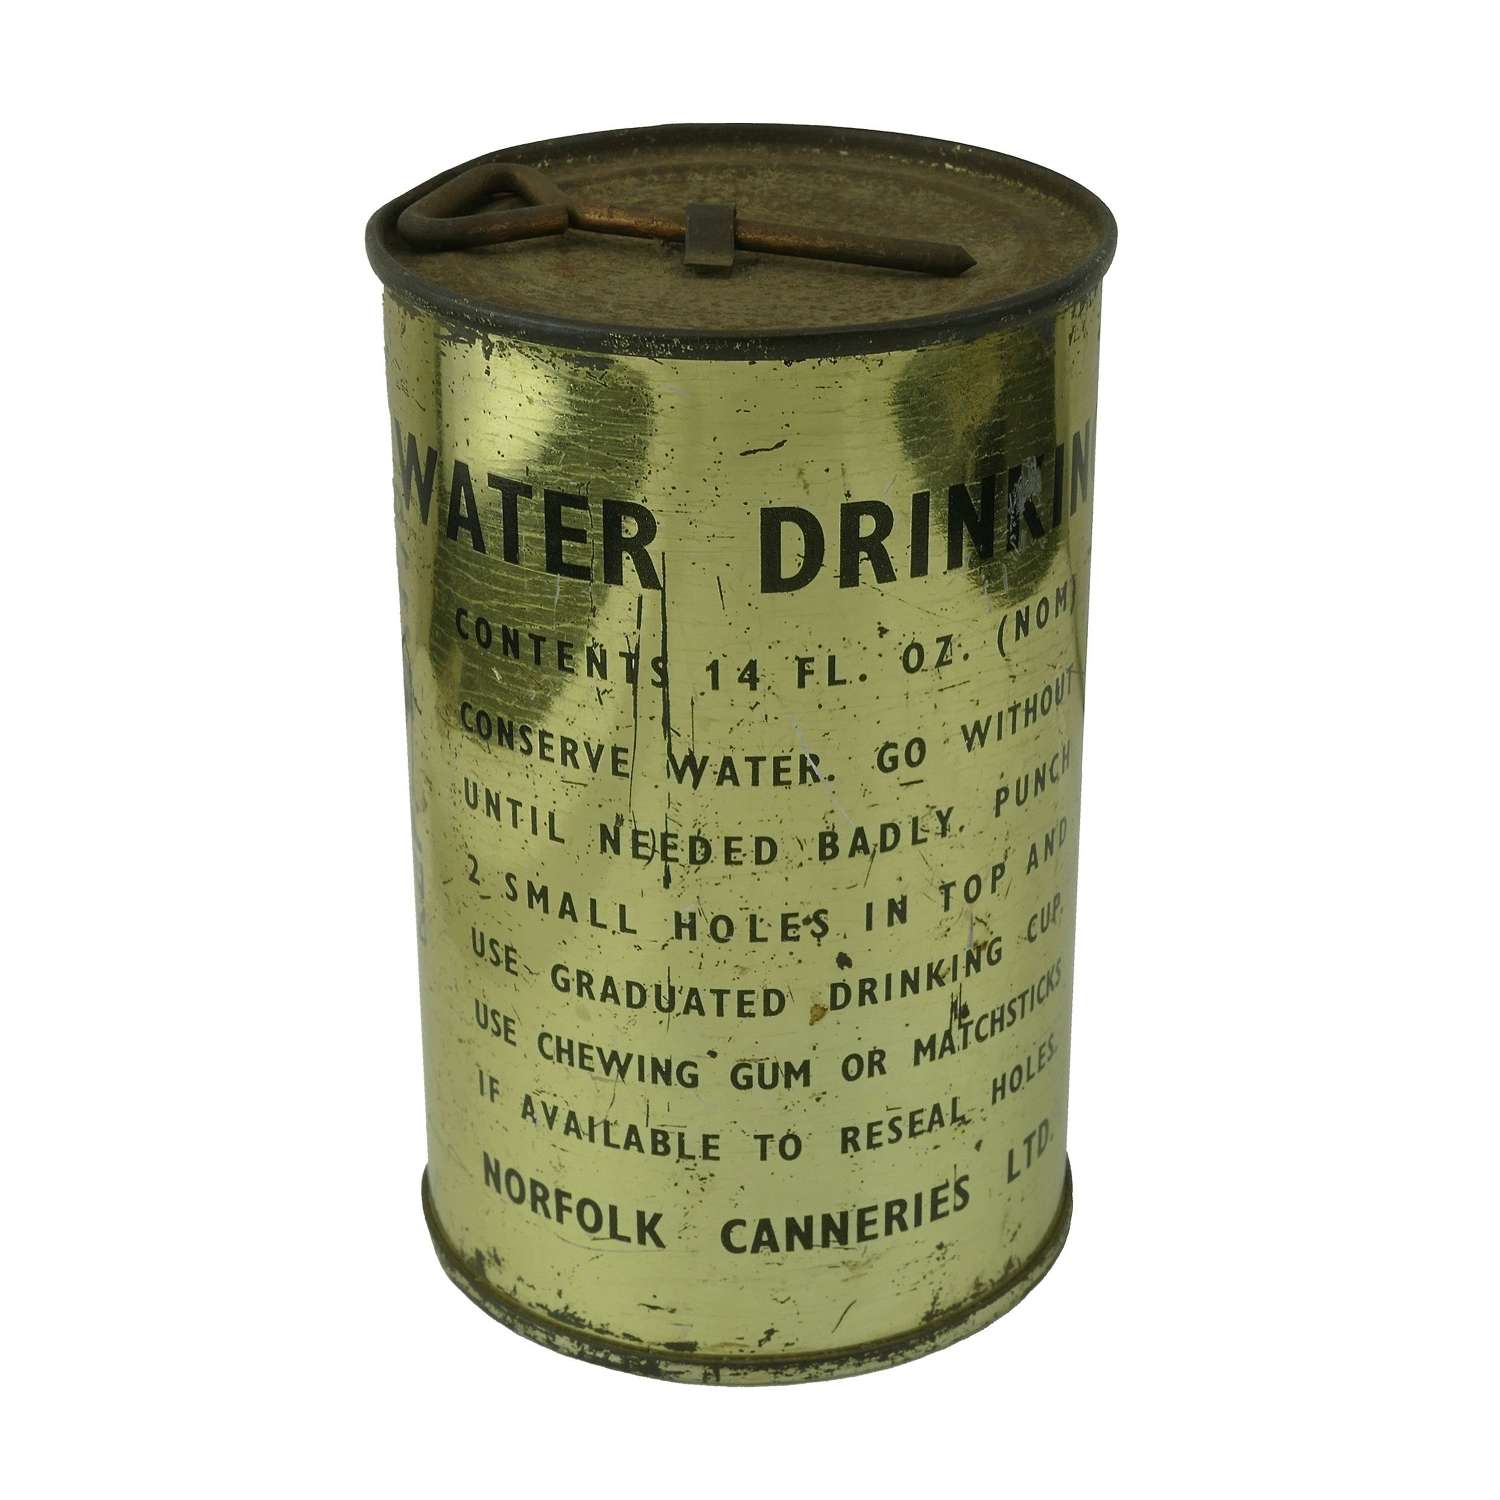 RAF survival kit canned water